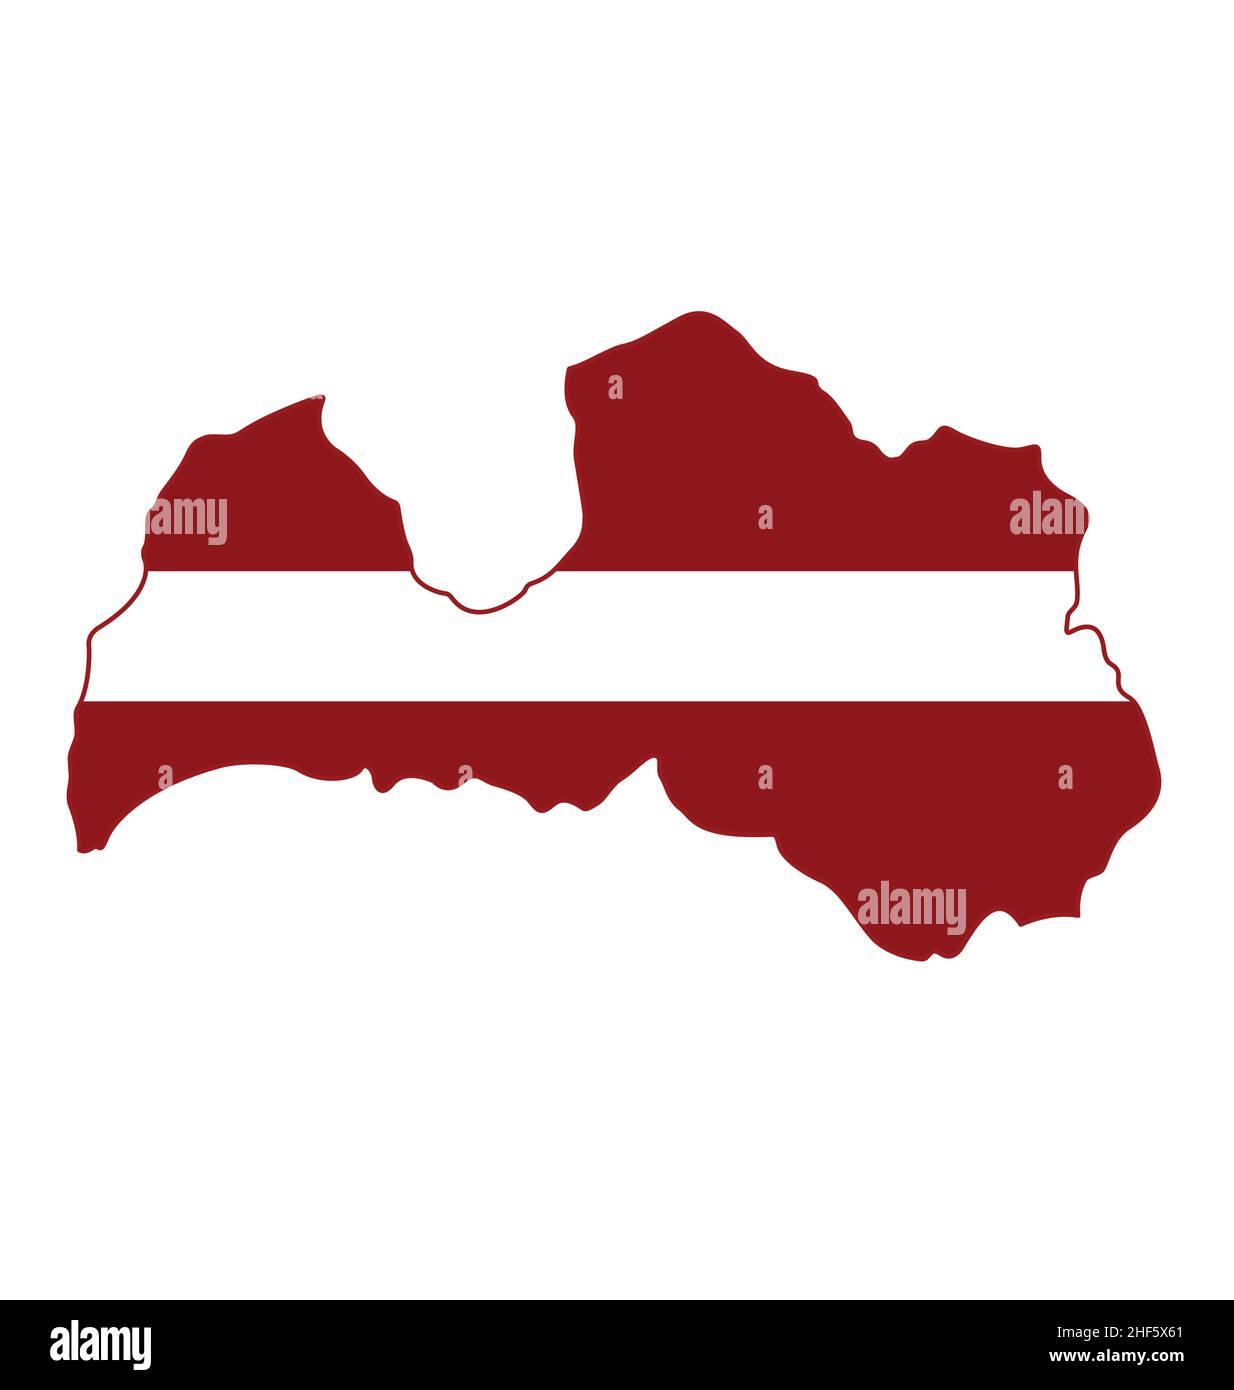 Latvian flag in simplified map shape of latvia symbol icon latvija vector isolated on white background Stock Vector